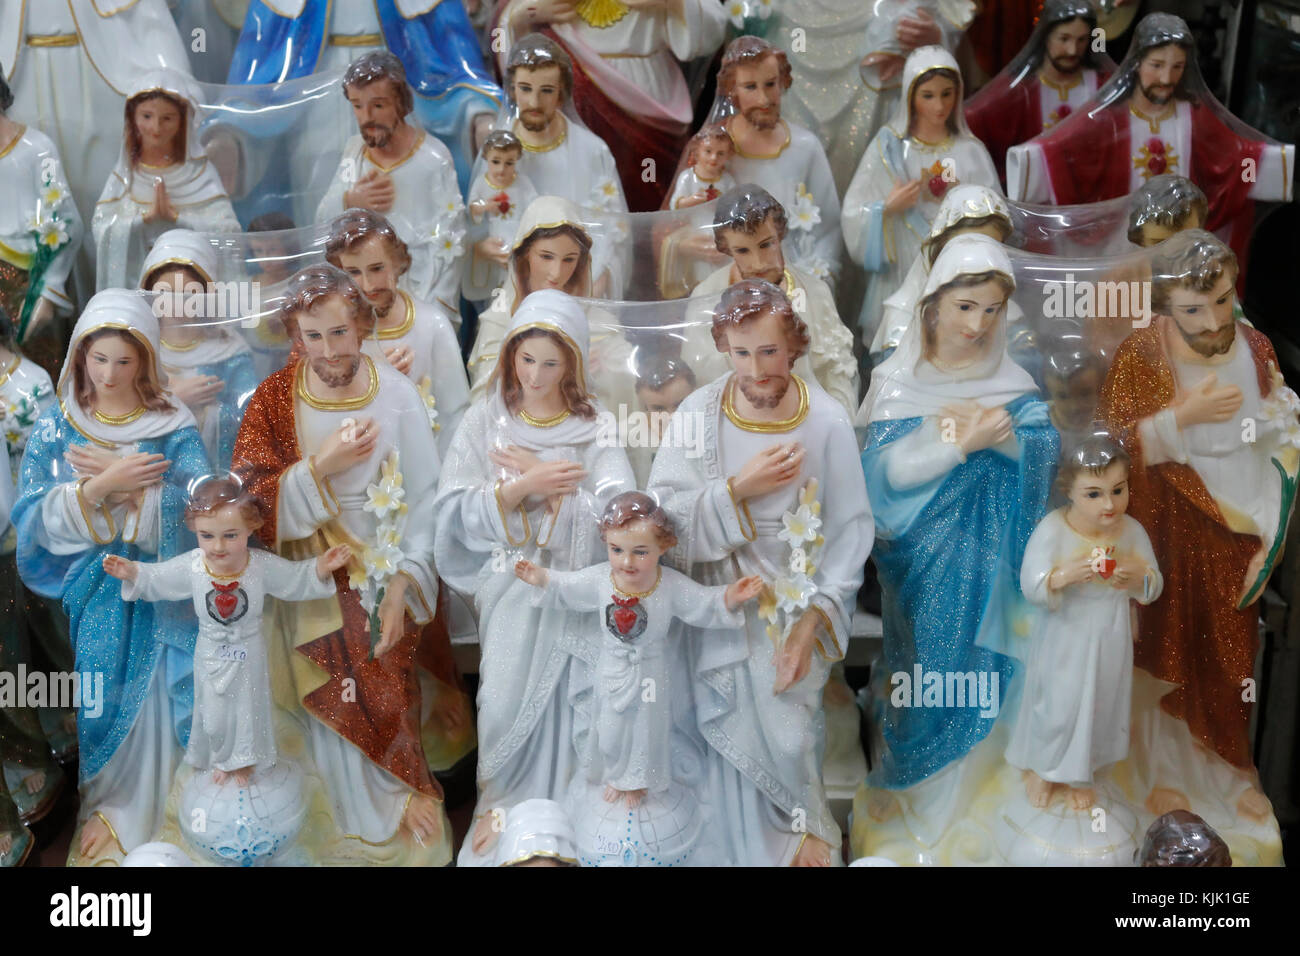 Shop selling religious christian items.  Holy Virgin statues.  Ho Chi Minh City.  Vietnam. Stock Photo